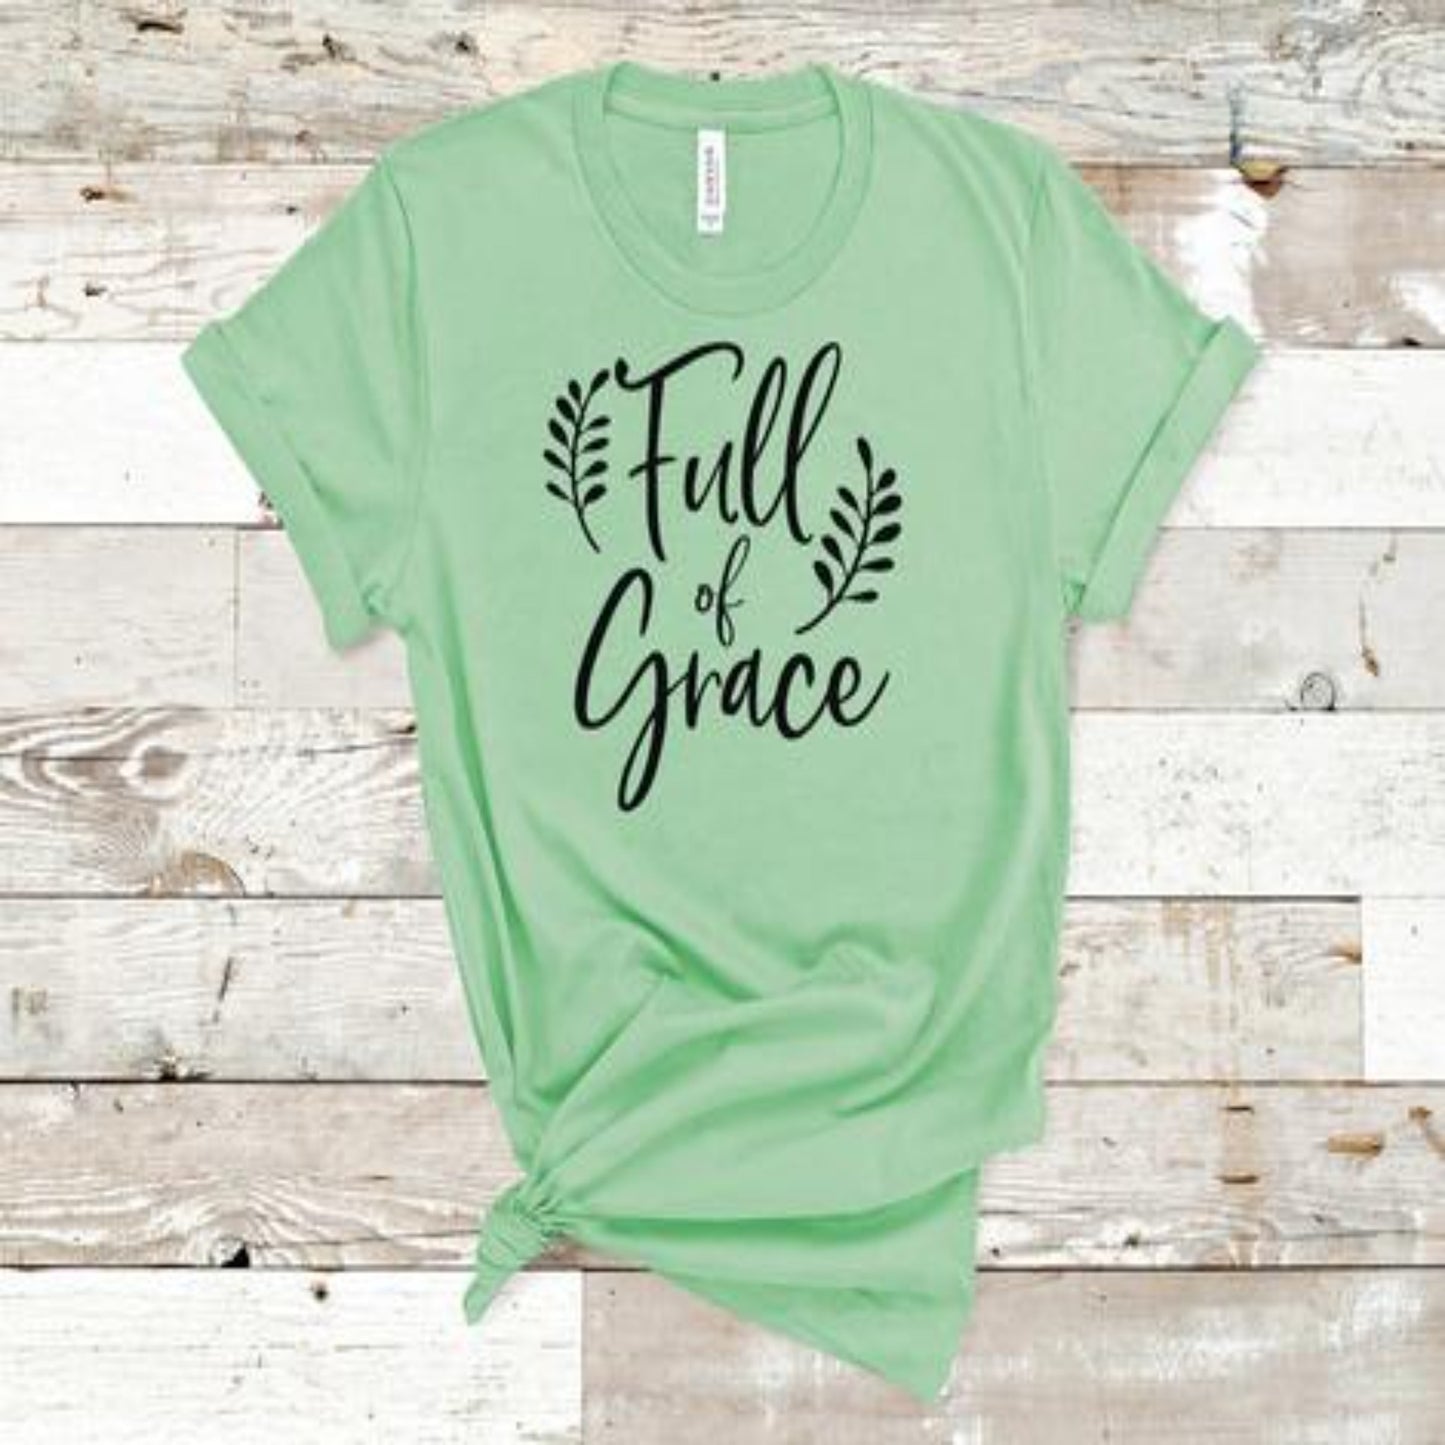 full_of_grace specialty tee everyday wear casual tshirt